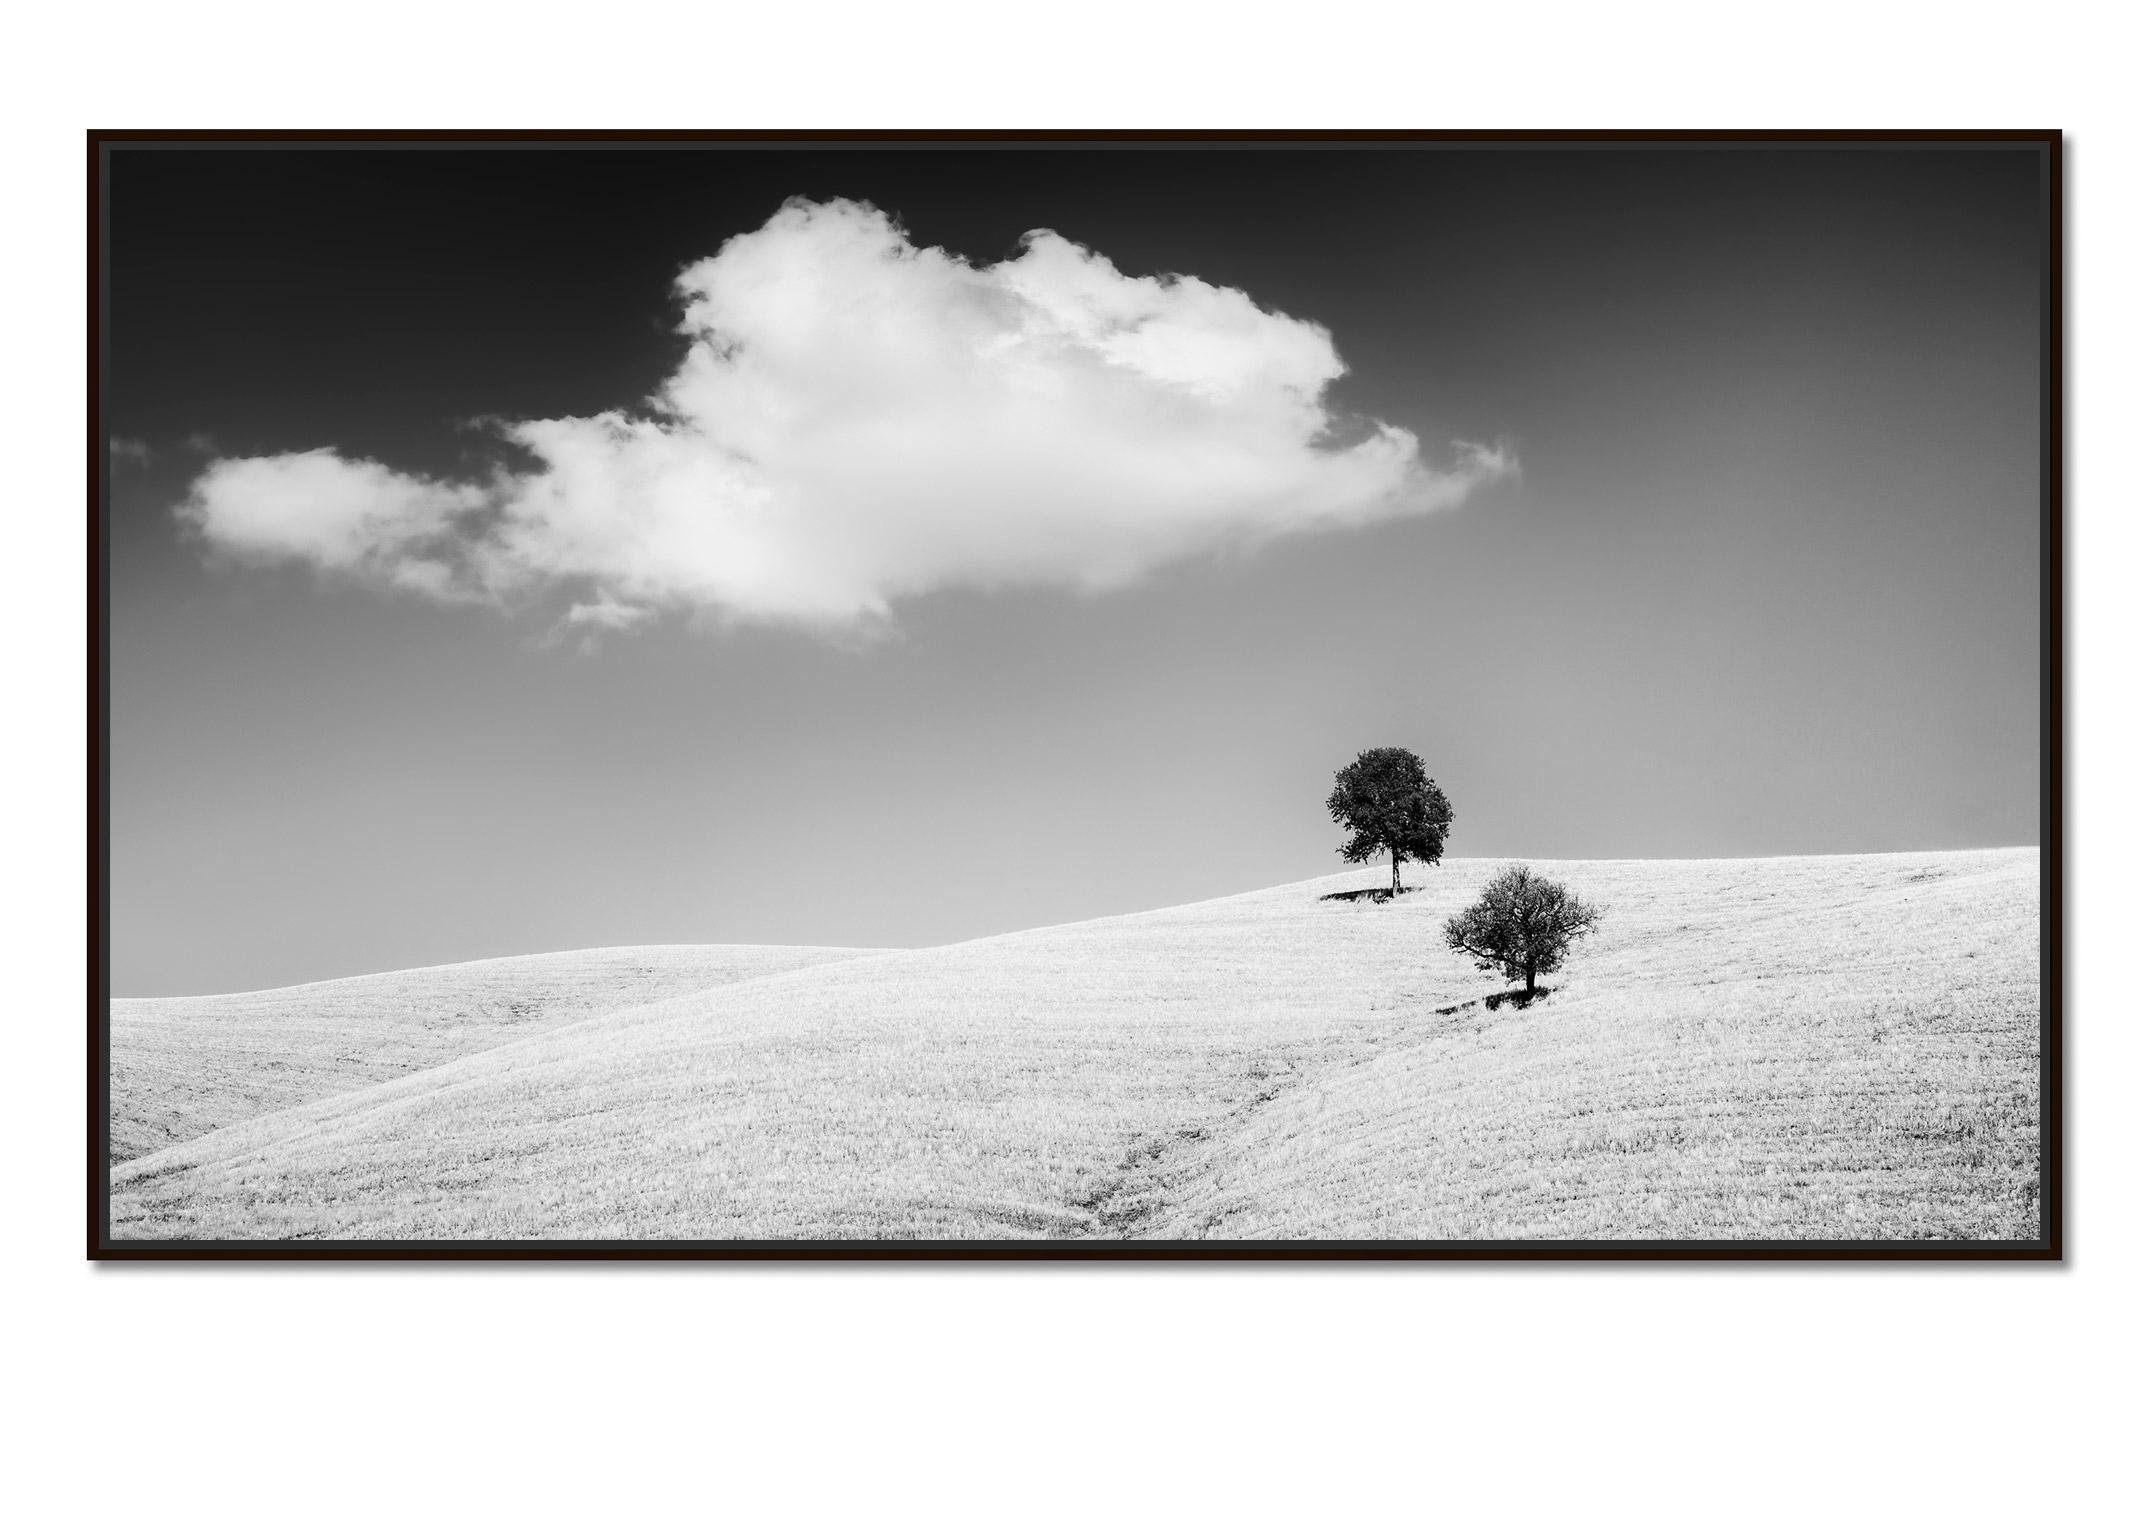 Rolling Hills with Trees, Tuscany, black & white fine art landscape photography - Photograph by Gerald Berghammer